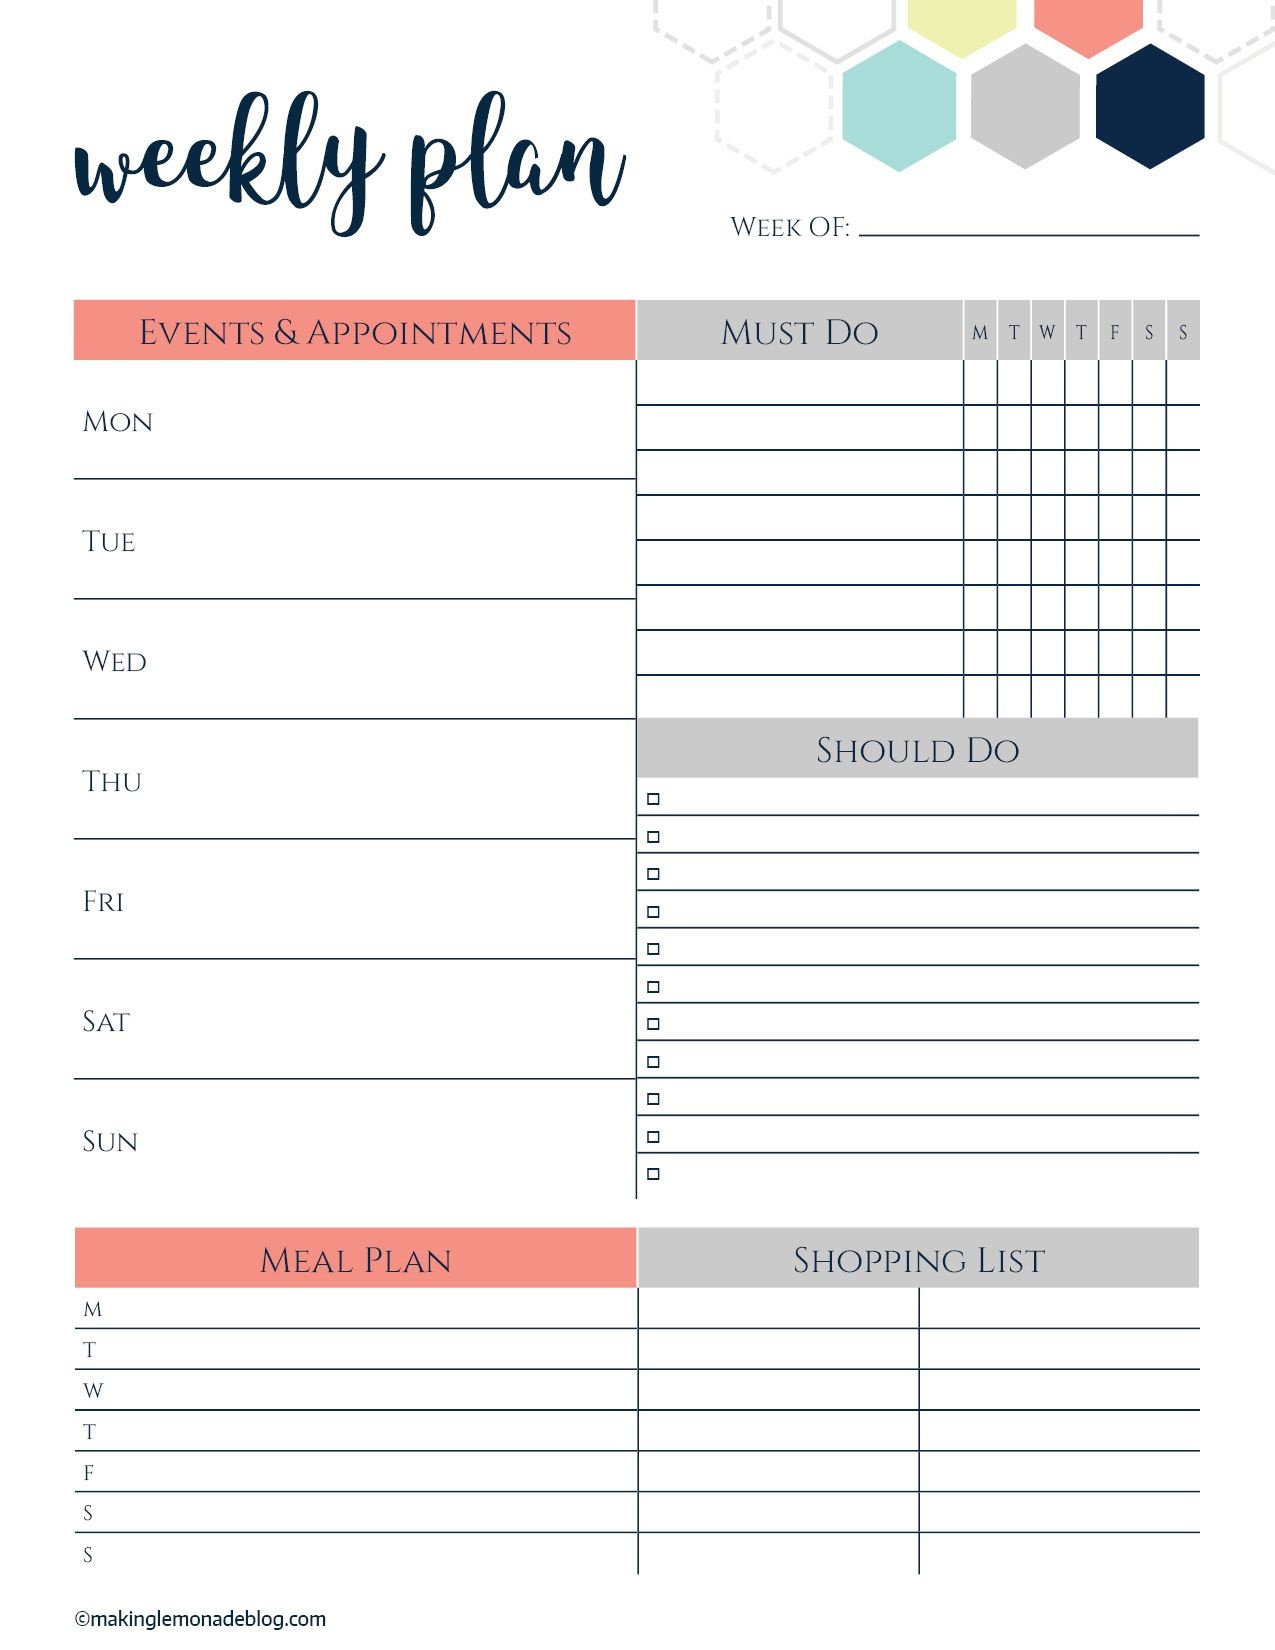 Slayyyyy Those Goals! This Free Printable Weekly Planner Organizes - Weekly To Do List Free Printable